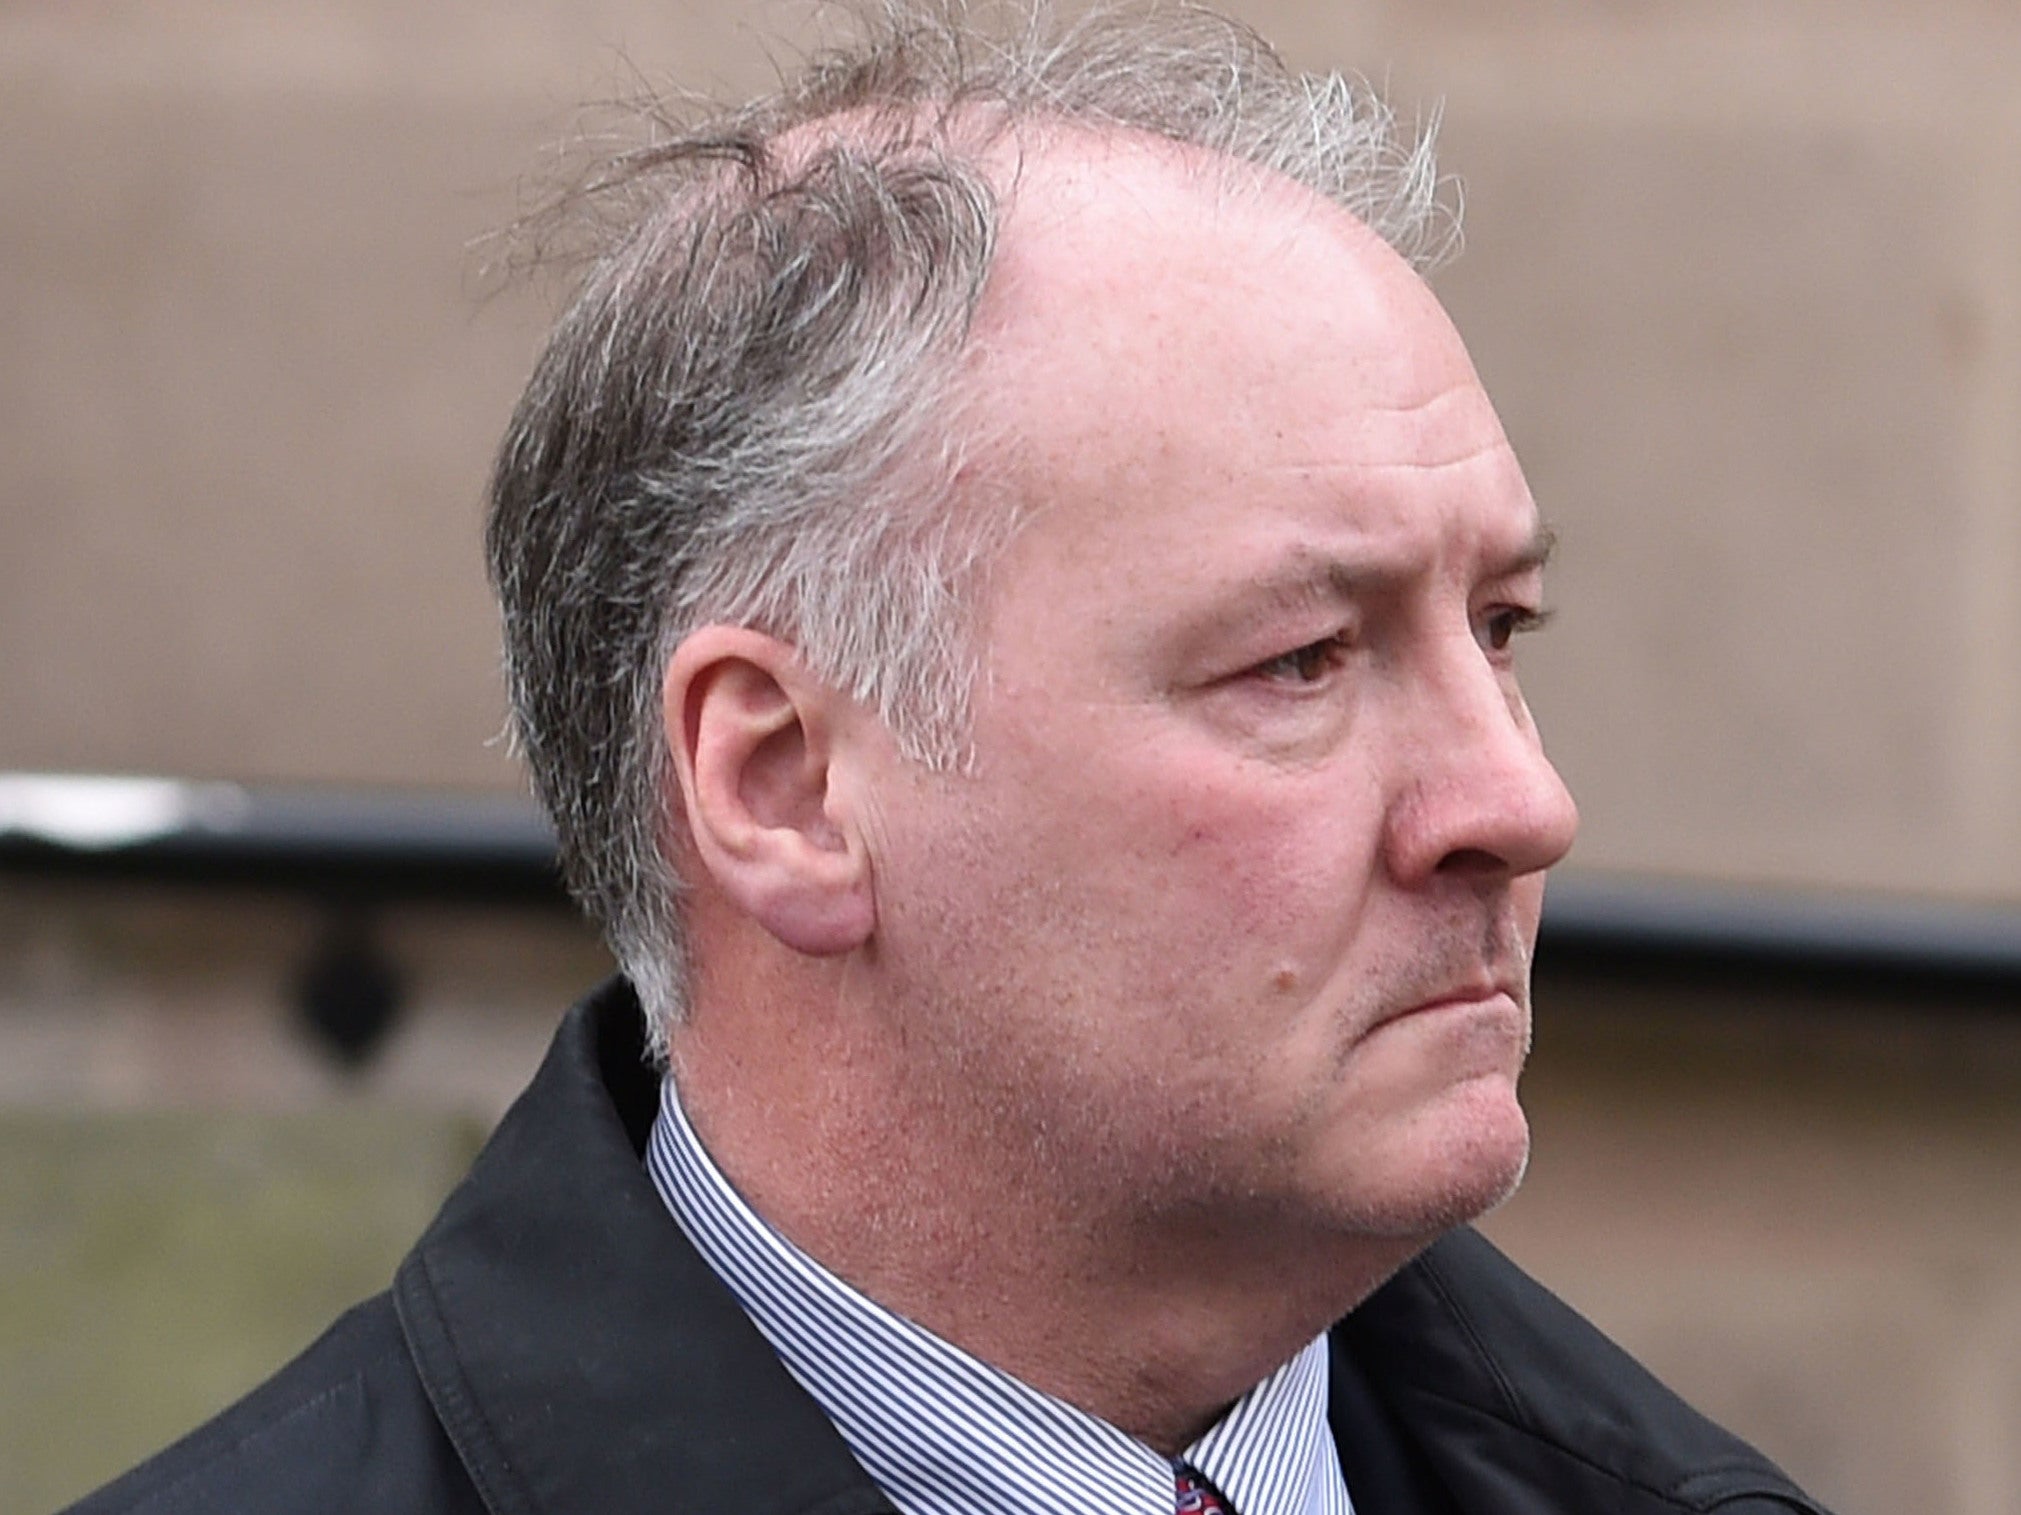 Concerns over safety of private services ‘thrown into sharp relief’ by case of jailed surgeon Ian Paterson